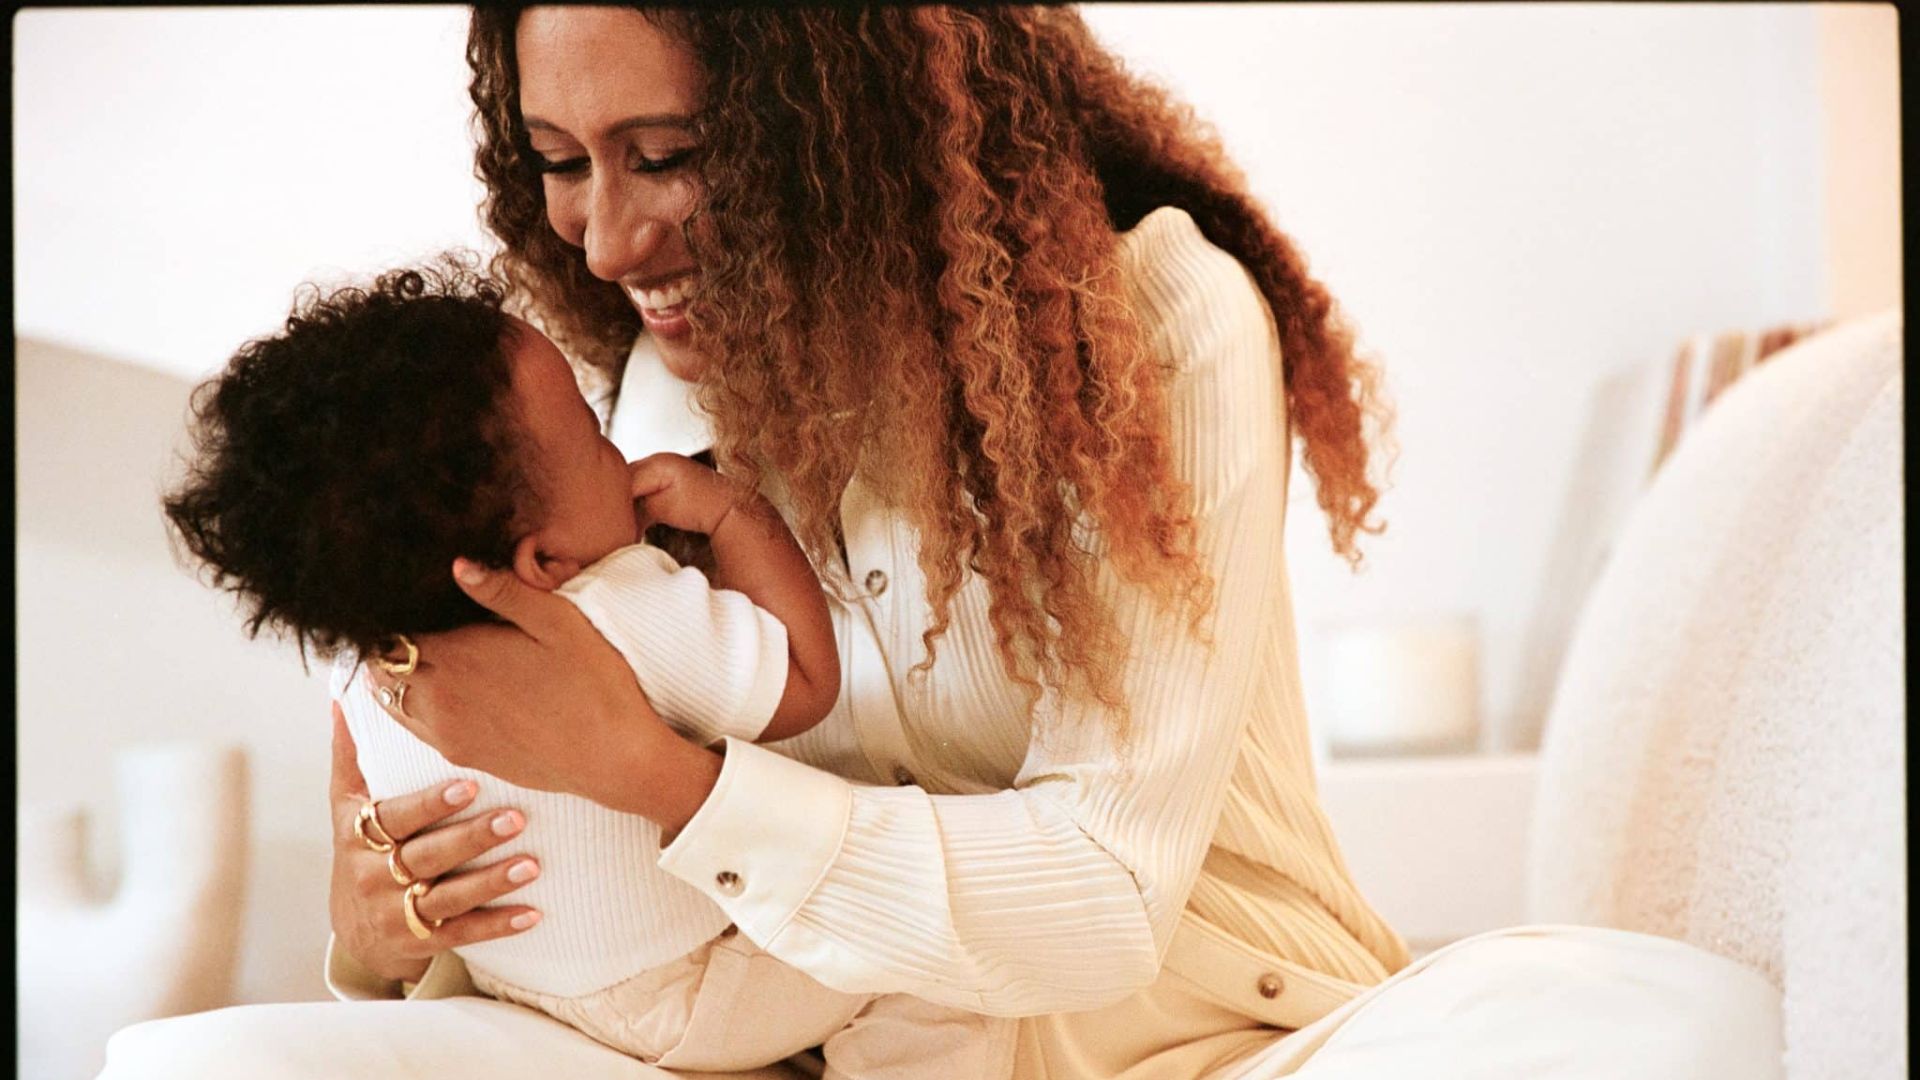 'I Didn't Know That This Could Happen To Me': Elaine Welteroth Shares Birth Story To Fight Maternal Mortality Crisis